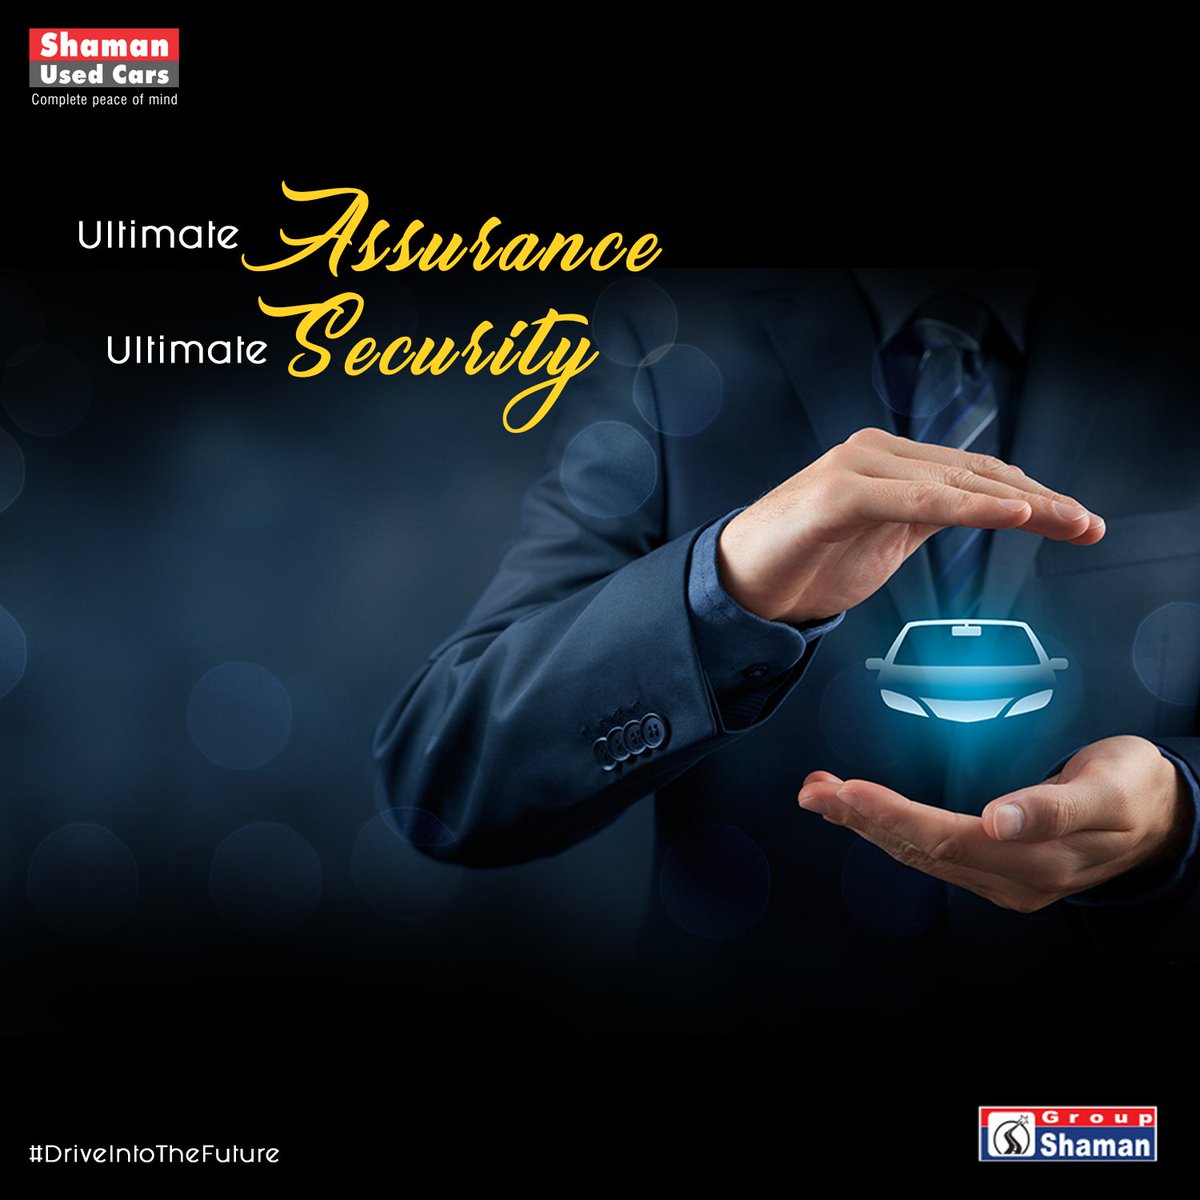 Our exclusive, Pre-Owned cars offer unmatched assurance, certified guarantee & ultimate transparency in transactions. Upgrade to a newer  model and #DriveWithAssurance, with the latest features and innovations in cars. With Shaman Used Cars, you can now truly #DriveIntoTheFuture